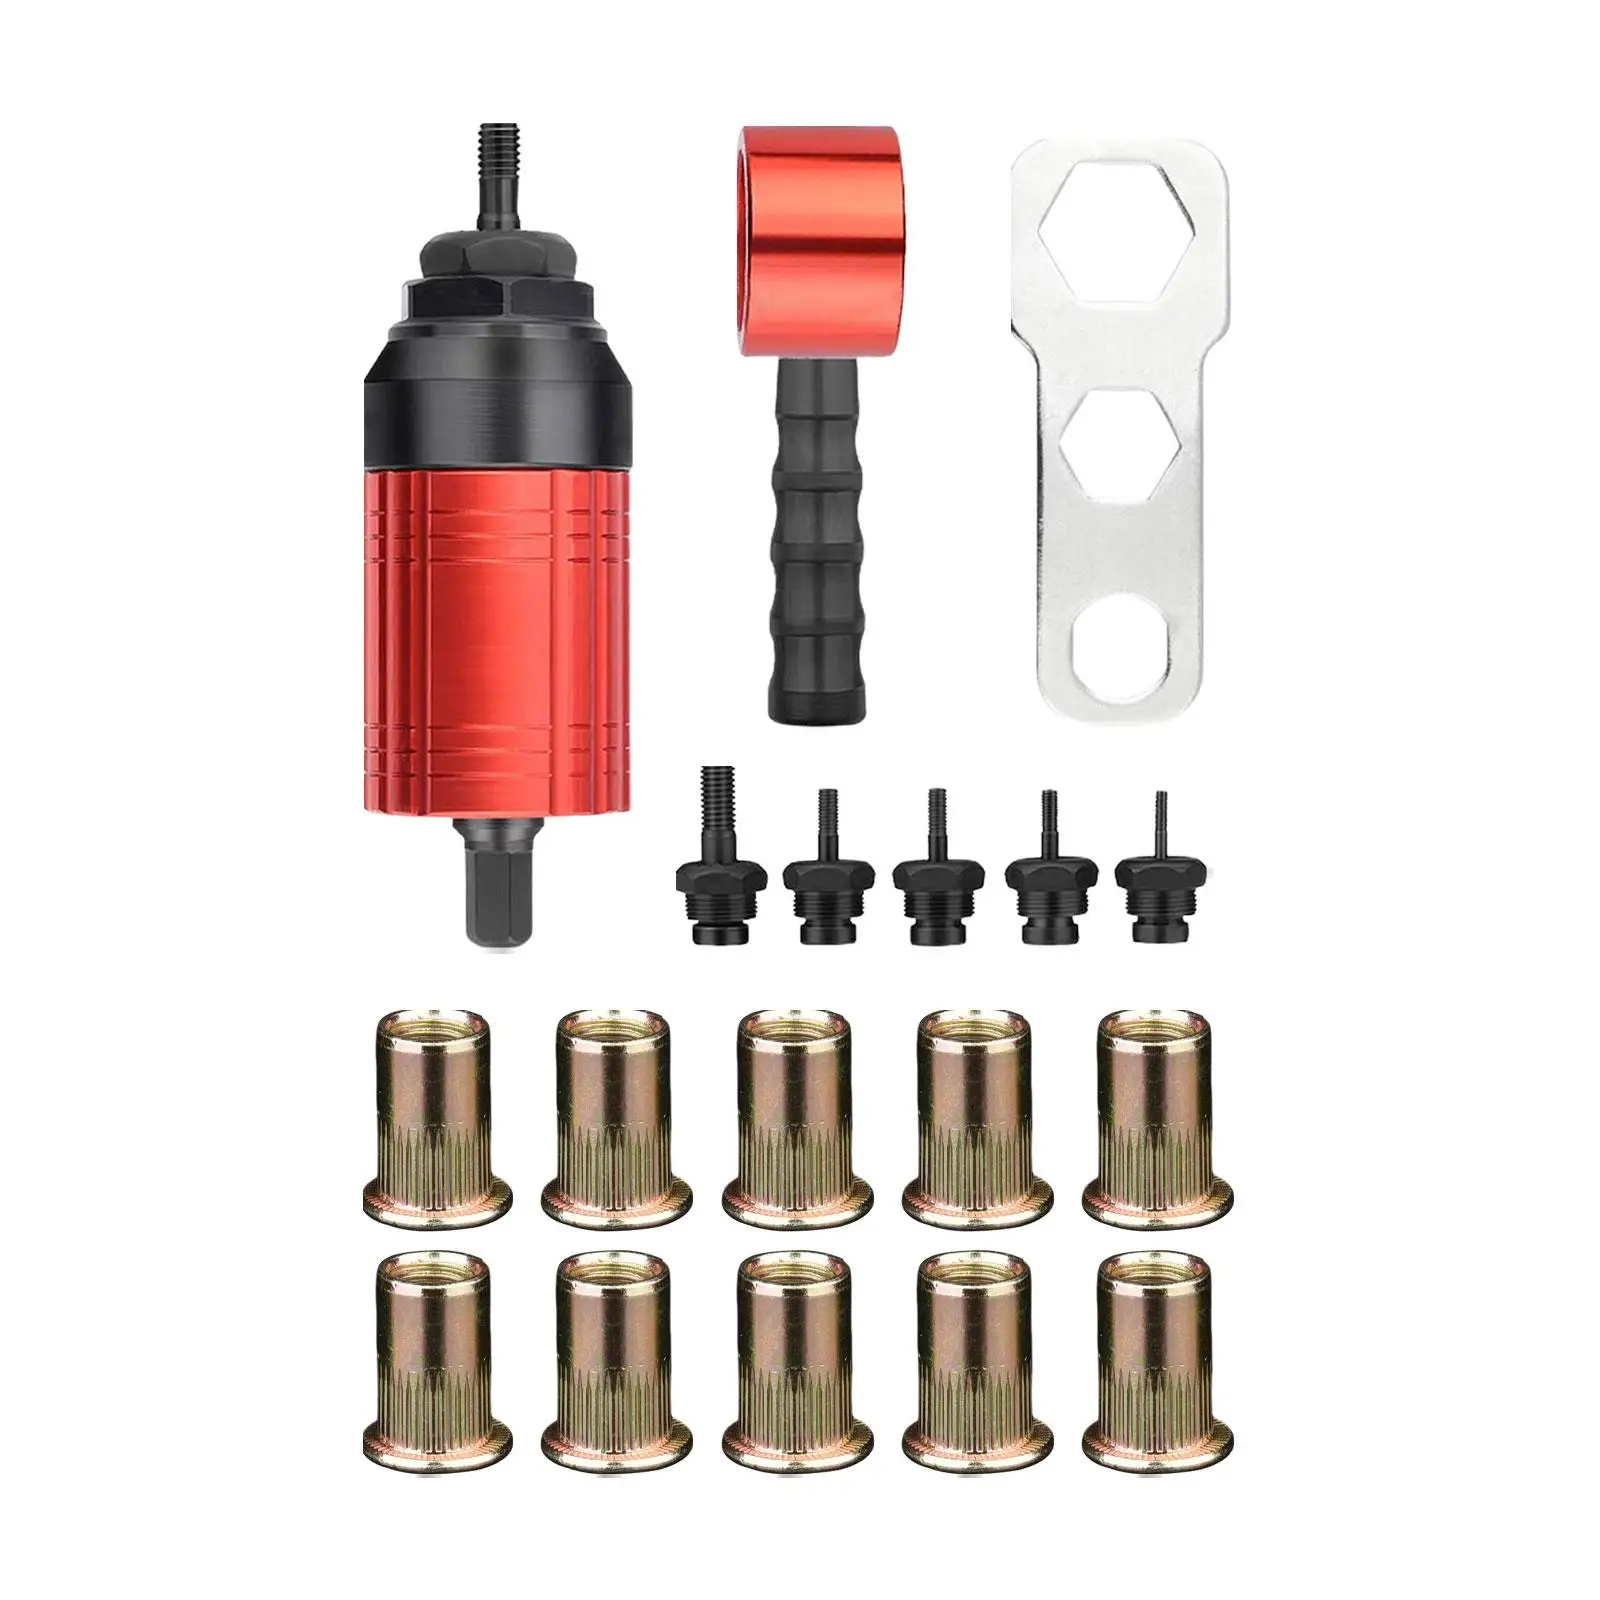 Rivet Nut Drill Adaptor Spare Parts Threaded Insert Installation Tool for Furniture Electrical Appliance Car Repair Architecture